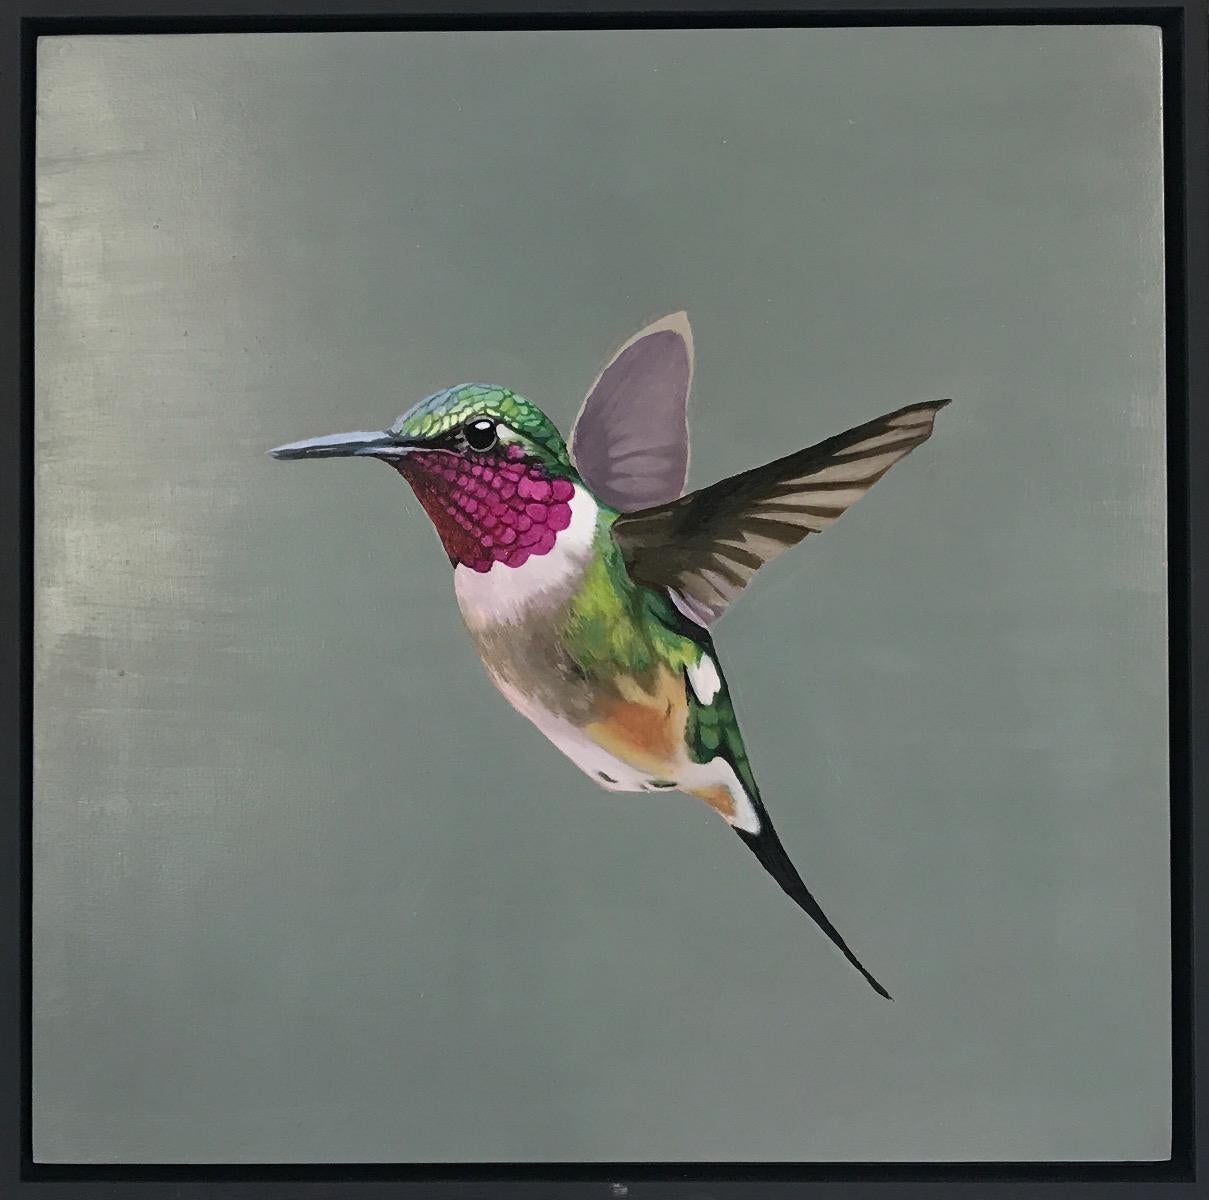 2 original paintings by Angela Smith.
Slightly different sizes, both sold framed - Tuesday's Girl (Sakura): Complete size of framed work: 53 H x 53 W x 3.5 D cm (20.87 x 20.87 x 1.38 in)
Single Hummingbird, Framed size: 45.5 H x 45.5 W x 2.5 D cm